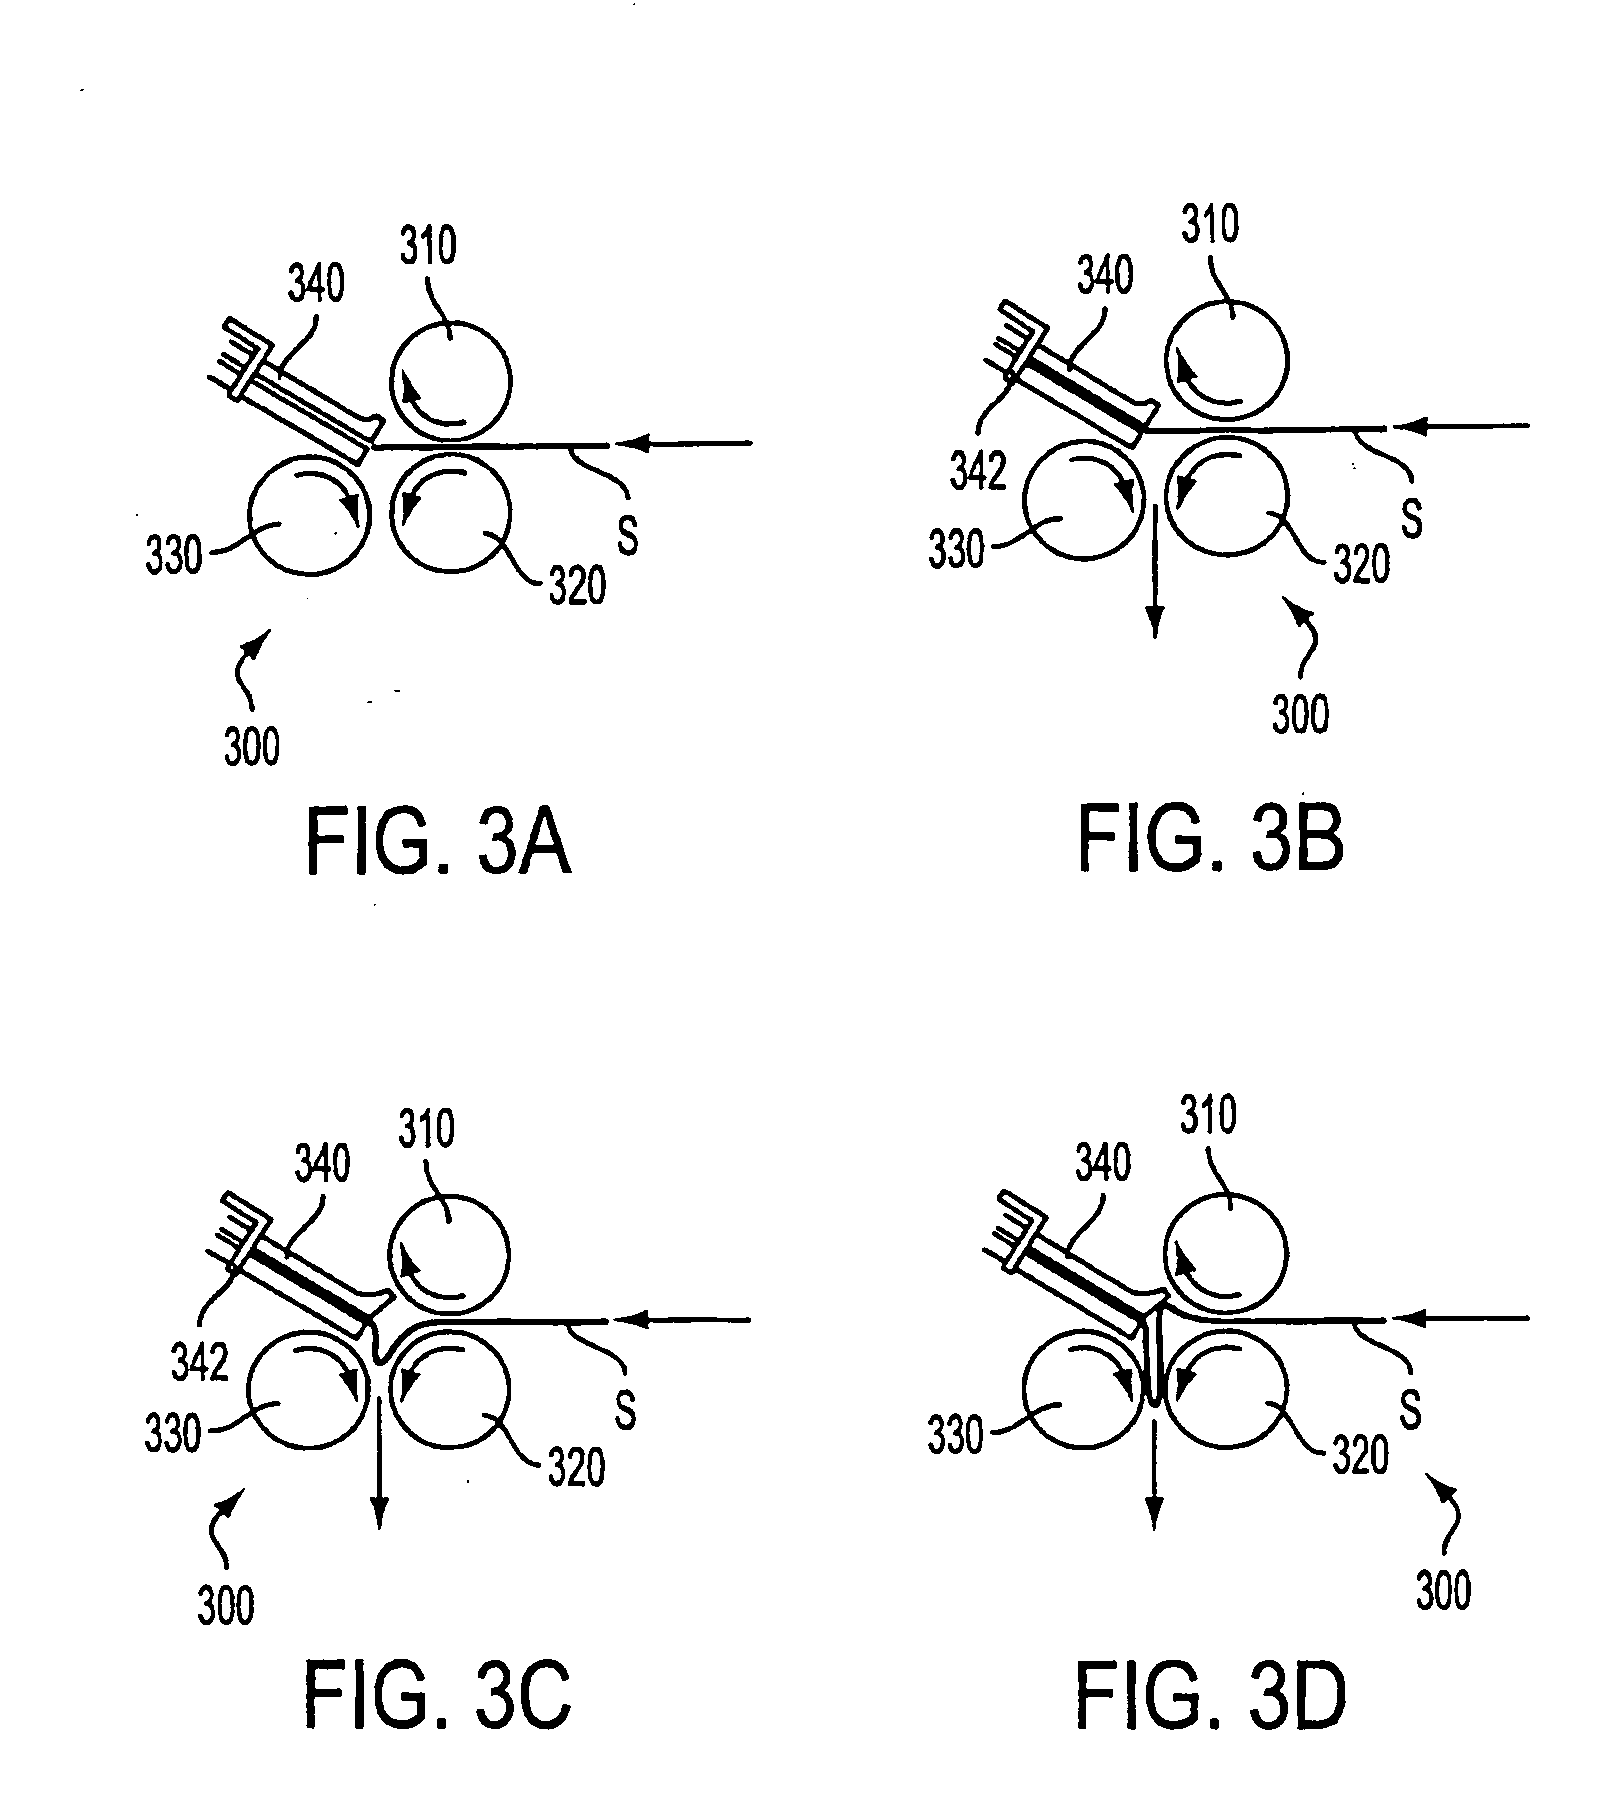 Sheet folding and trimming apparatus